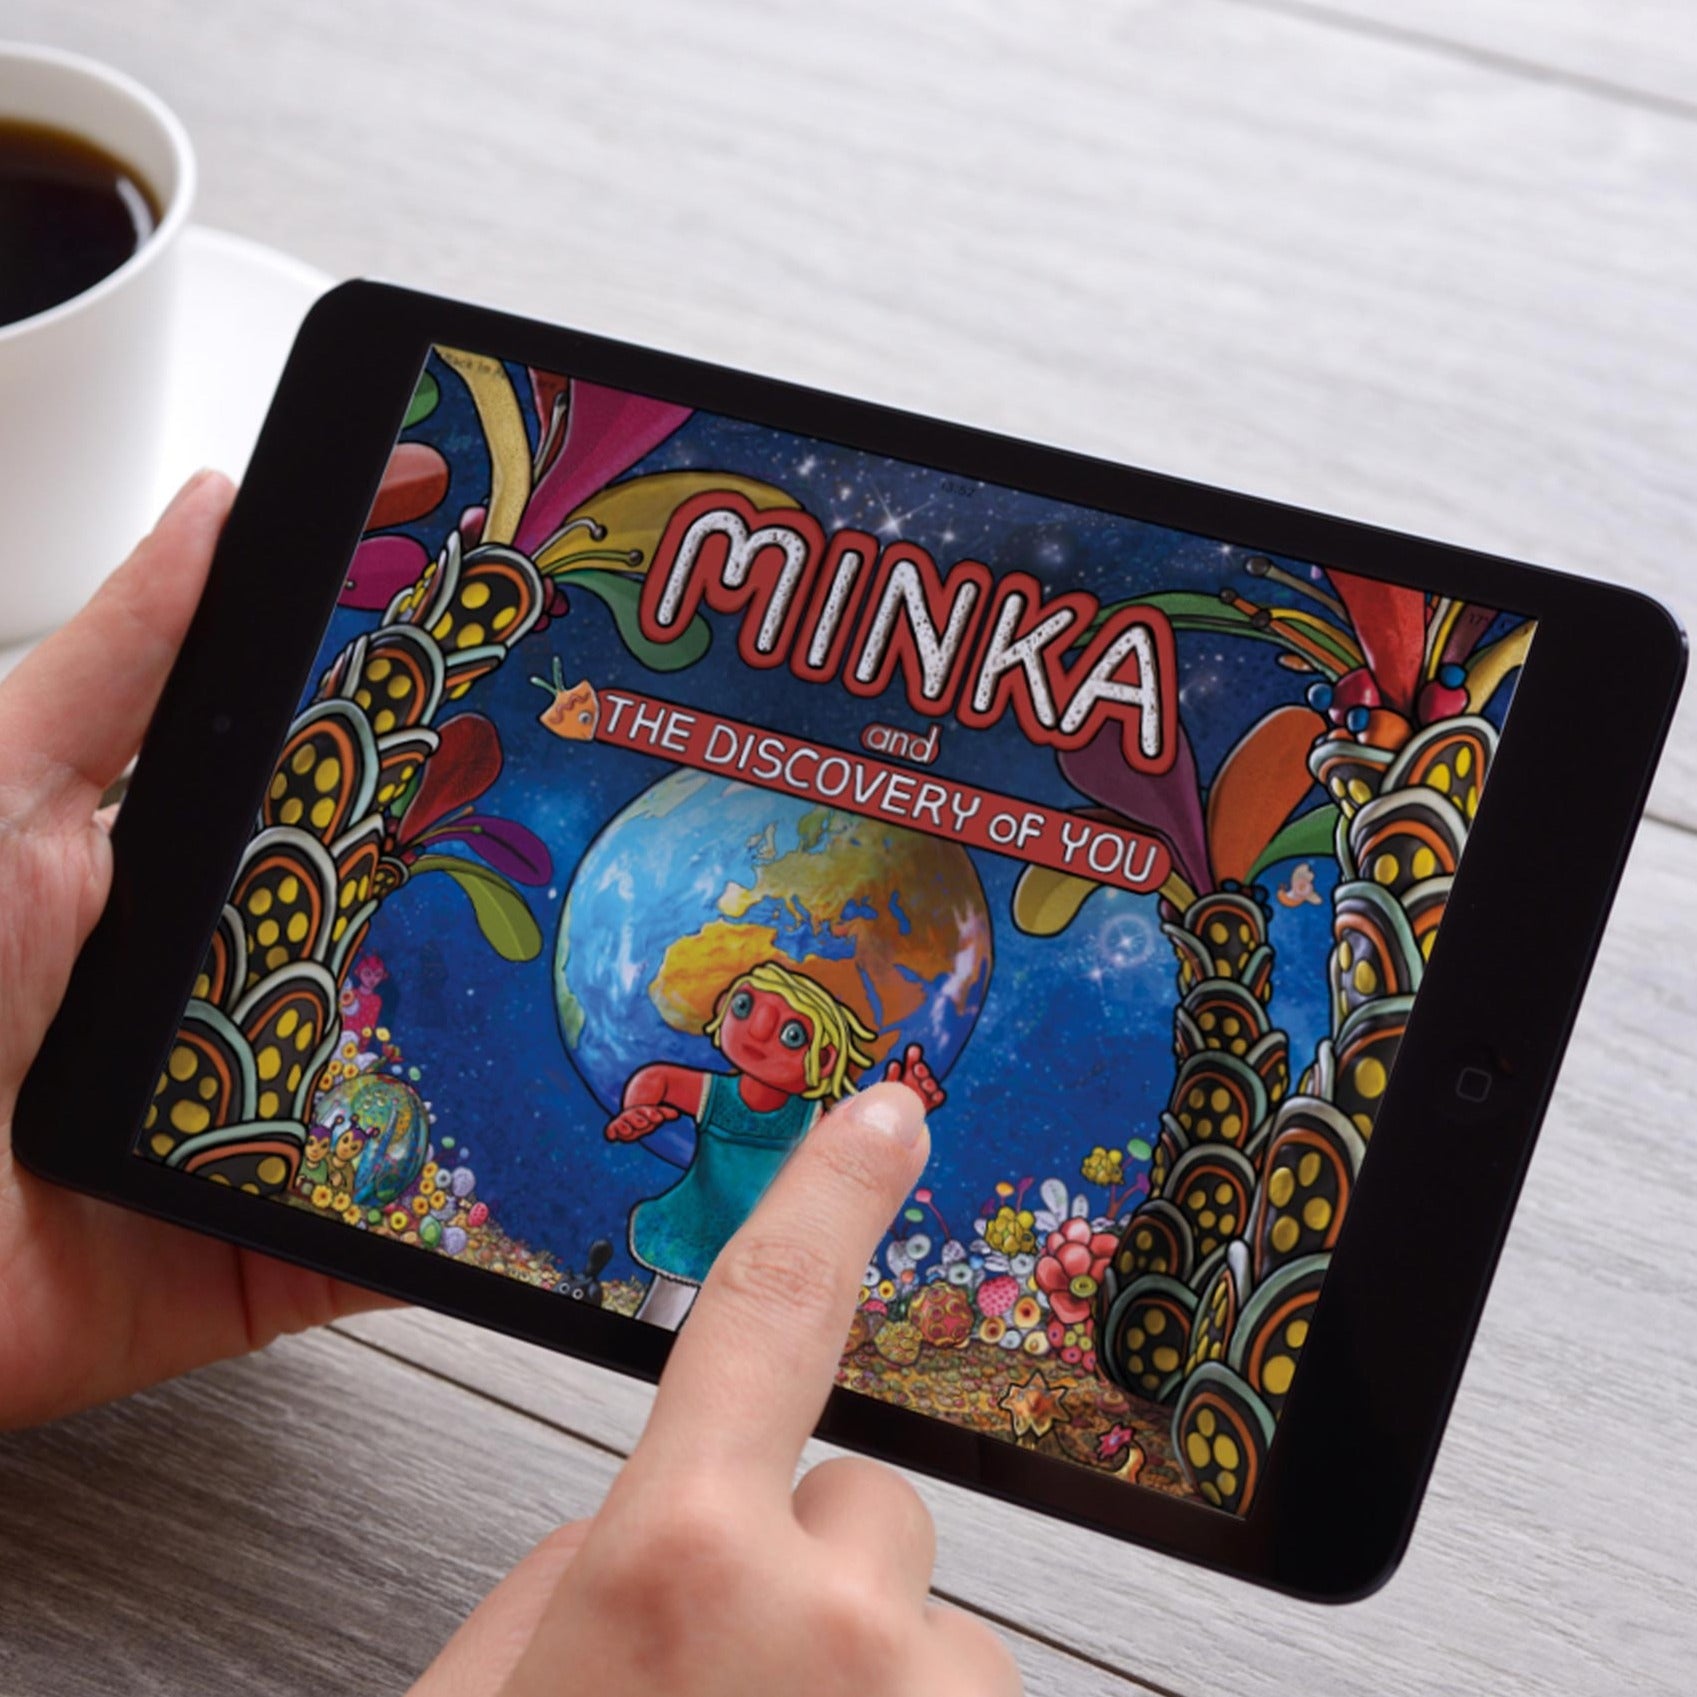 Minka and the Discovery of YOU - EBook Digital Download